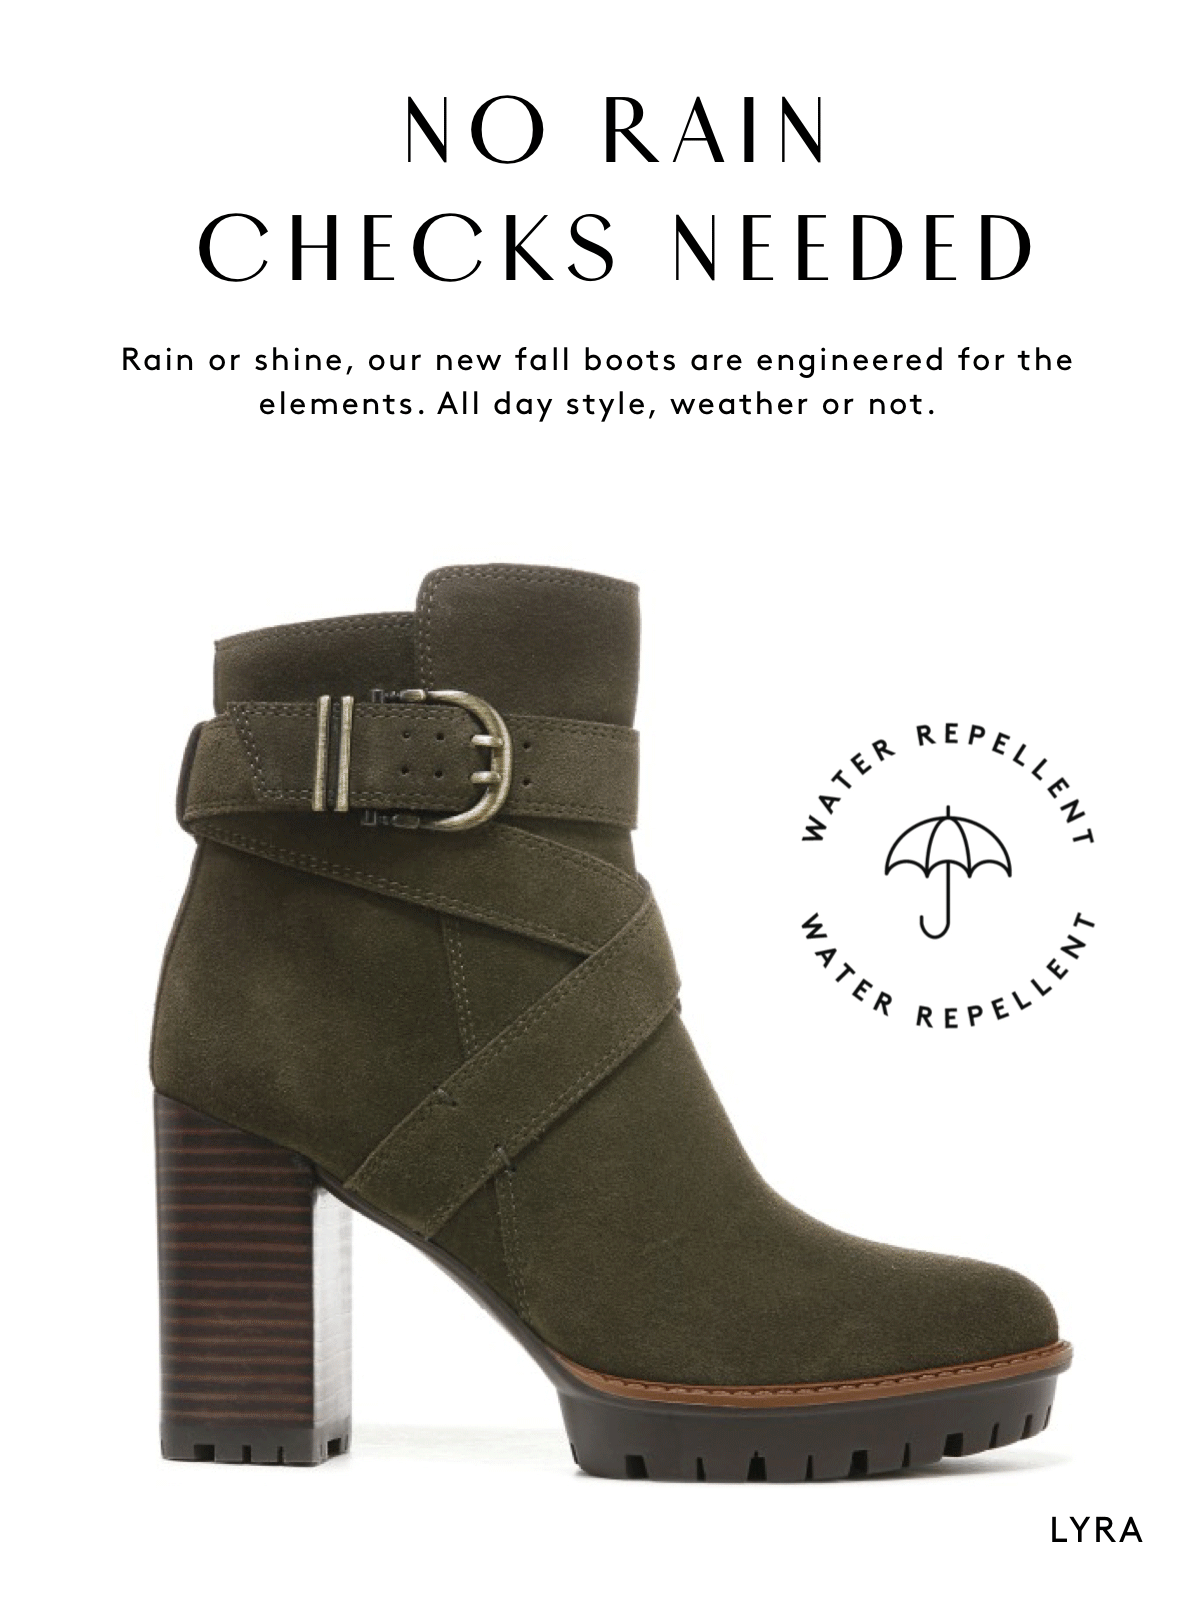 NO RAIN CHECKS NEEDED Rain or shine, our new fall boots are engineered for the elements. All day style, weather or not. Lyra